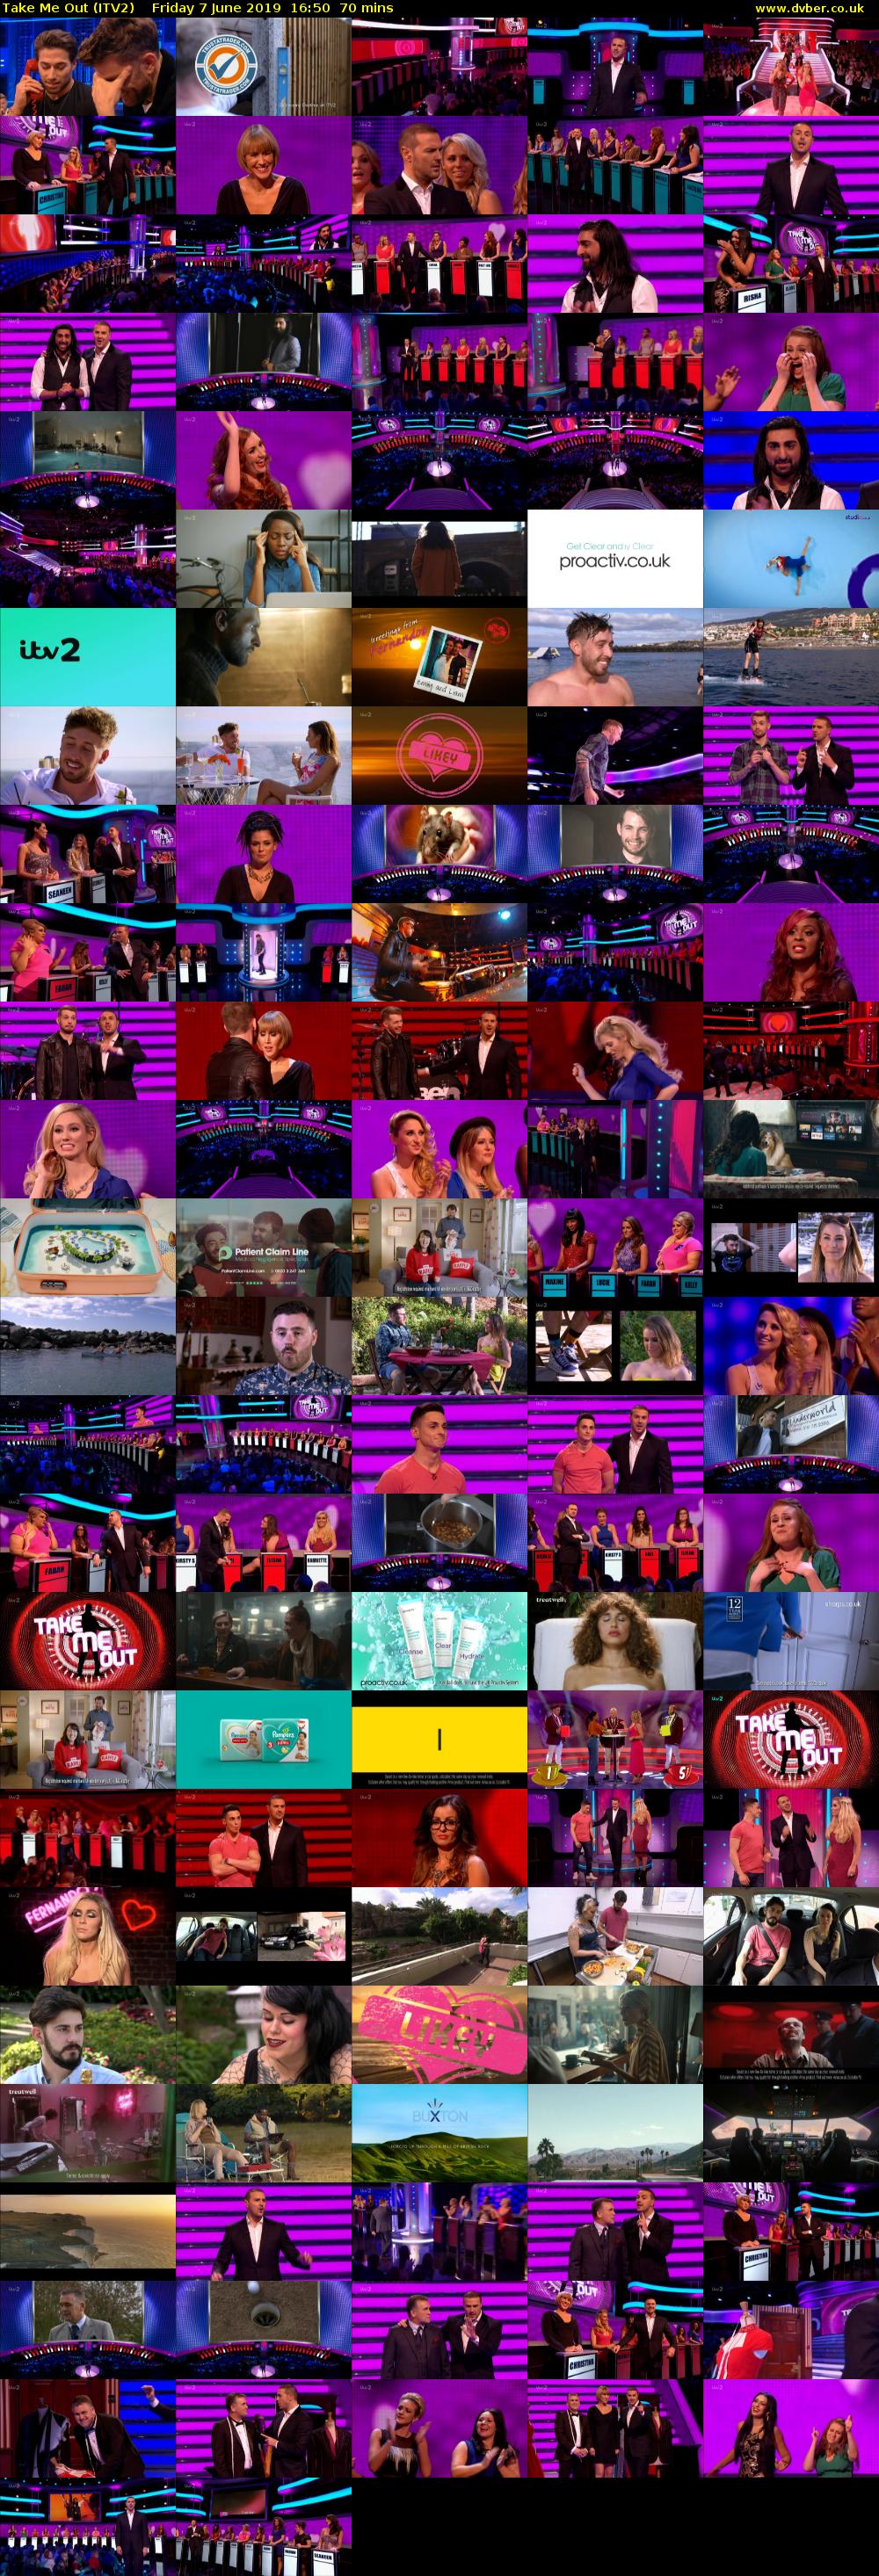 Take Me Out (ITV2) Friday 7 June 2019 16:50 - 18:00